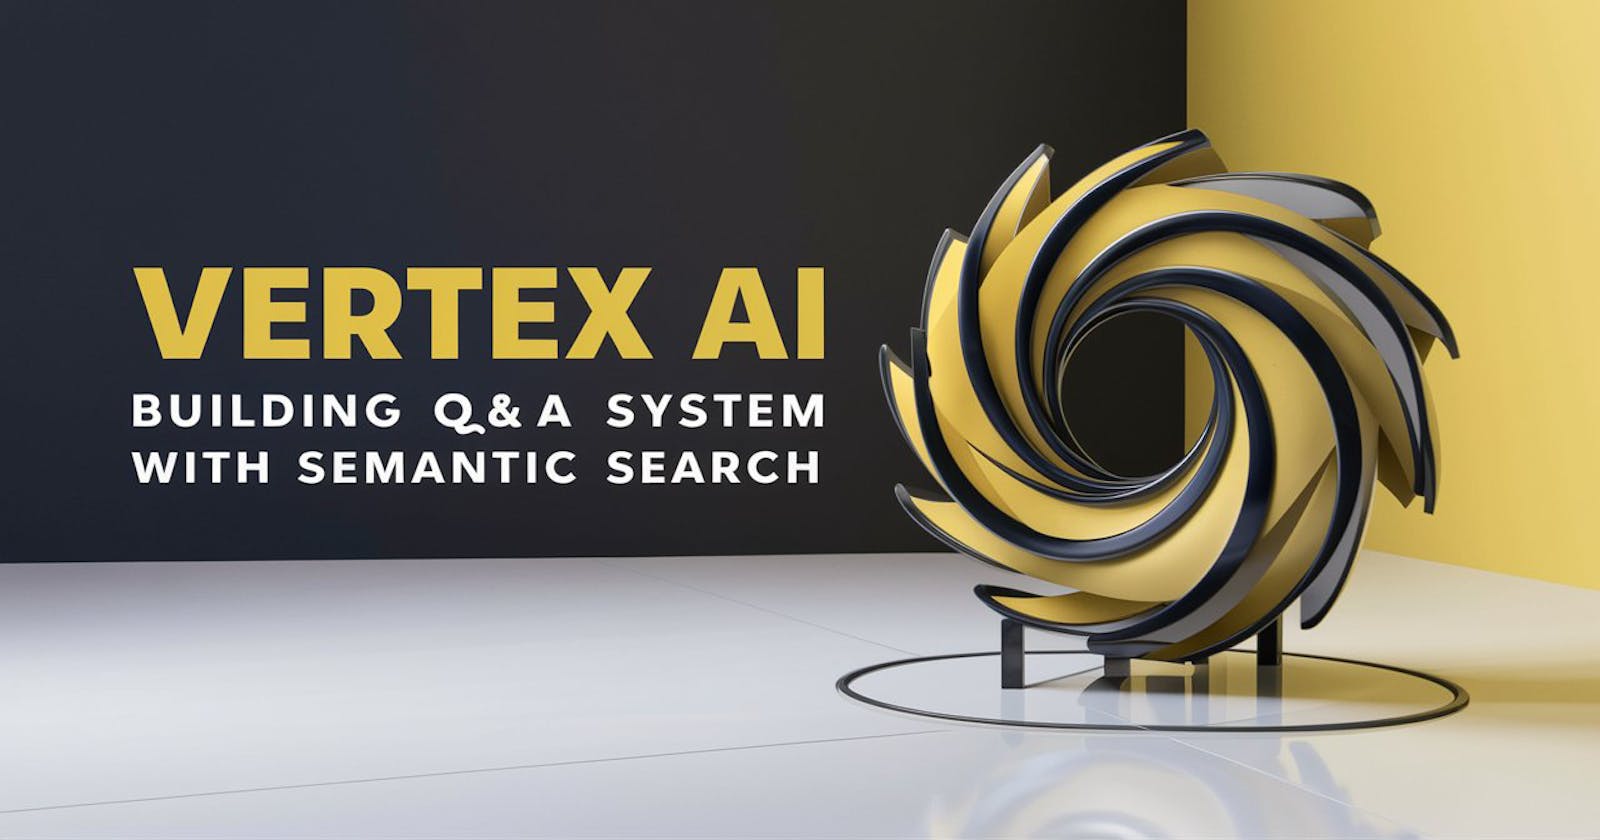 Vertex AI: Building a Q&A System with Semantic Search